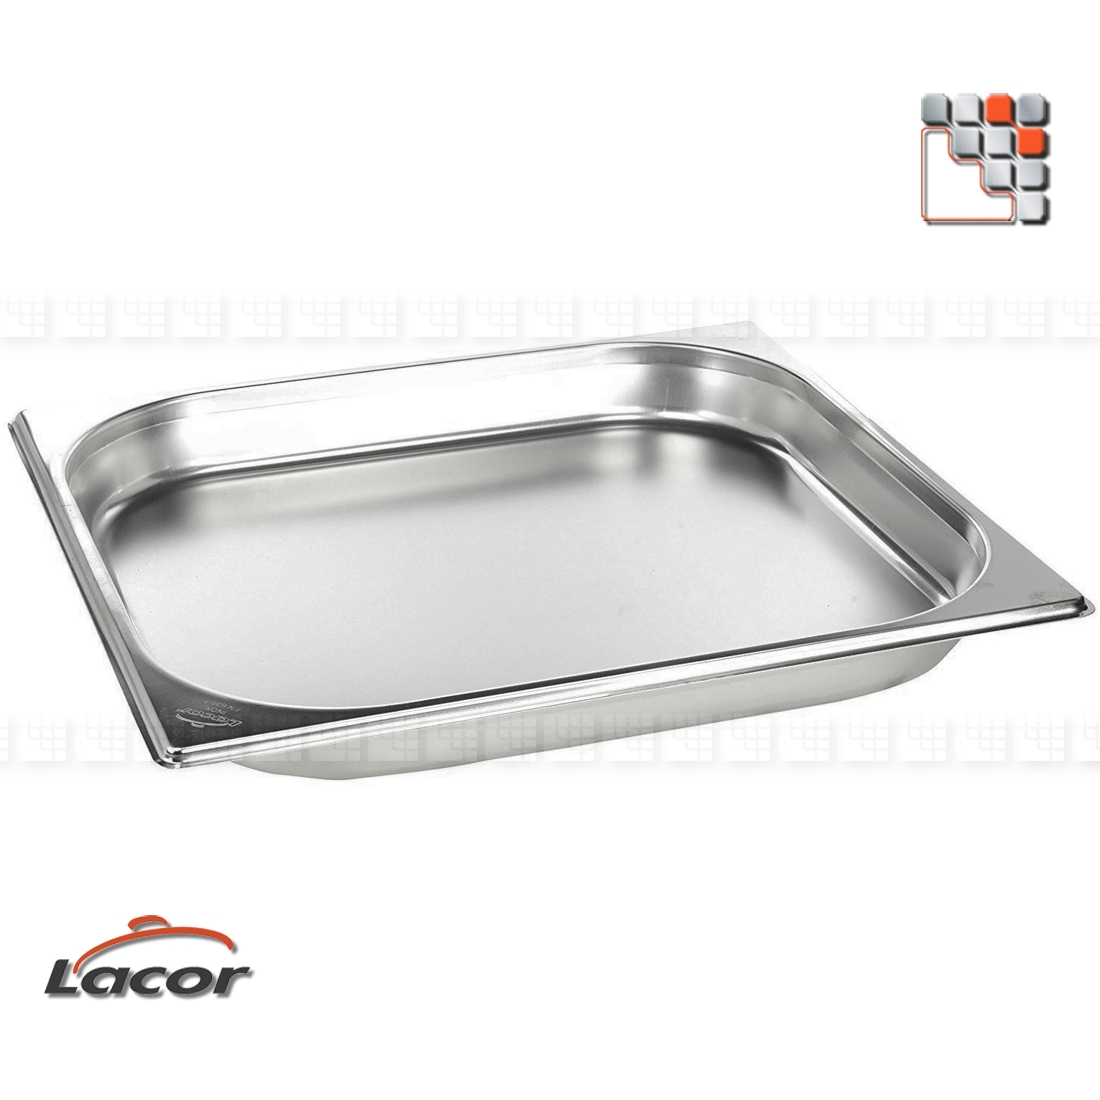 Gastro stainless steel container GN 18/10 LACOR L10-66240 LACOR® Kitchen Utensils